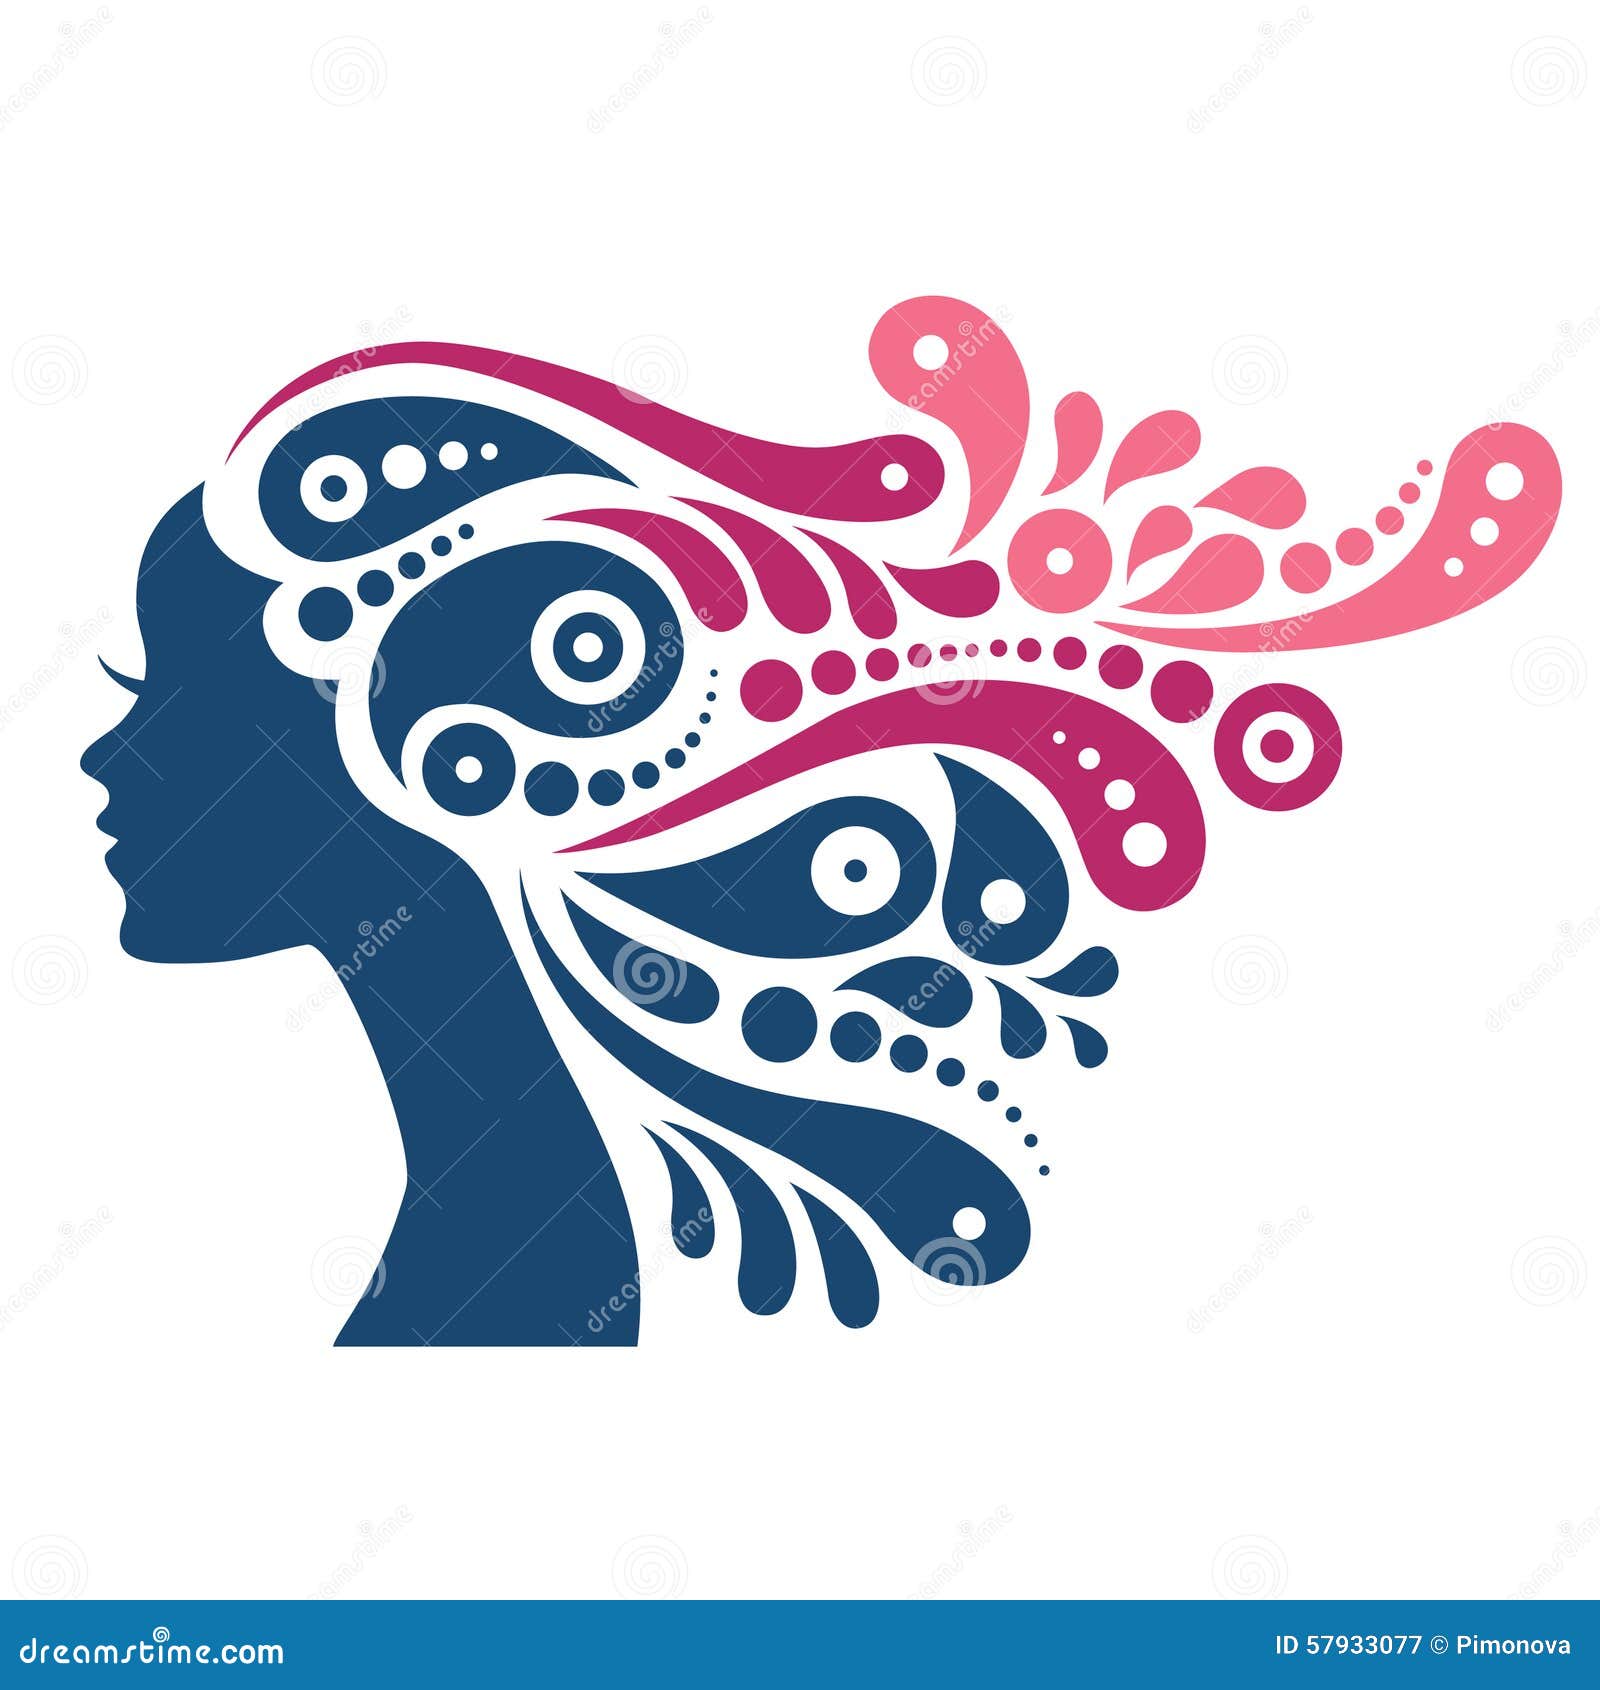 Beautiful woman silhouette stock vector. Illustration of glamour - 57933077